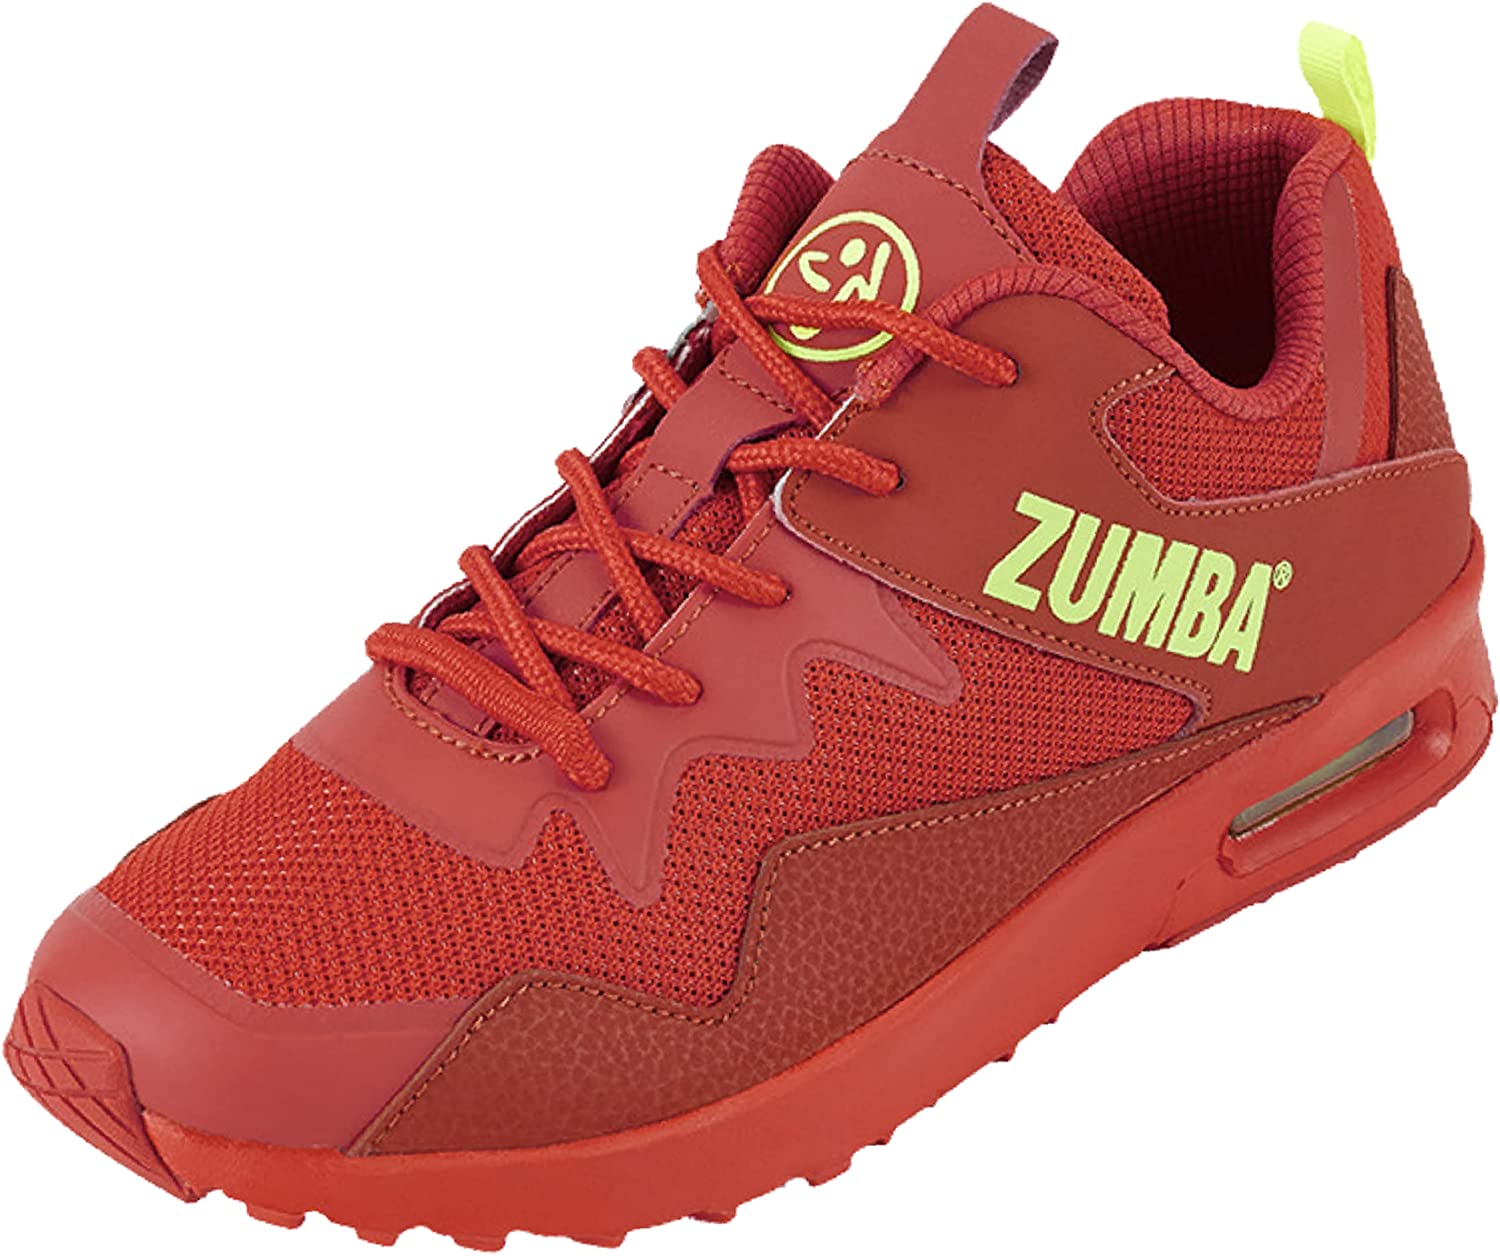 ZUMBA Sneakers, Low-Top Shoes for Women, Air Classic